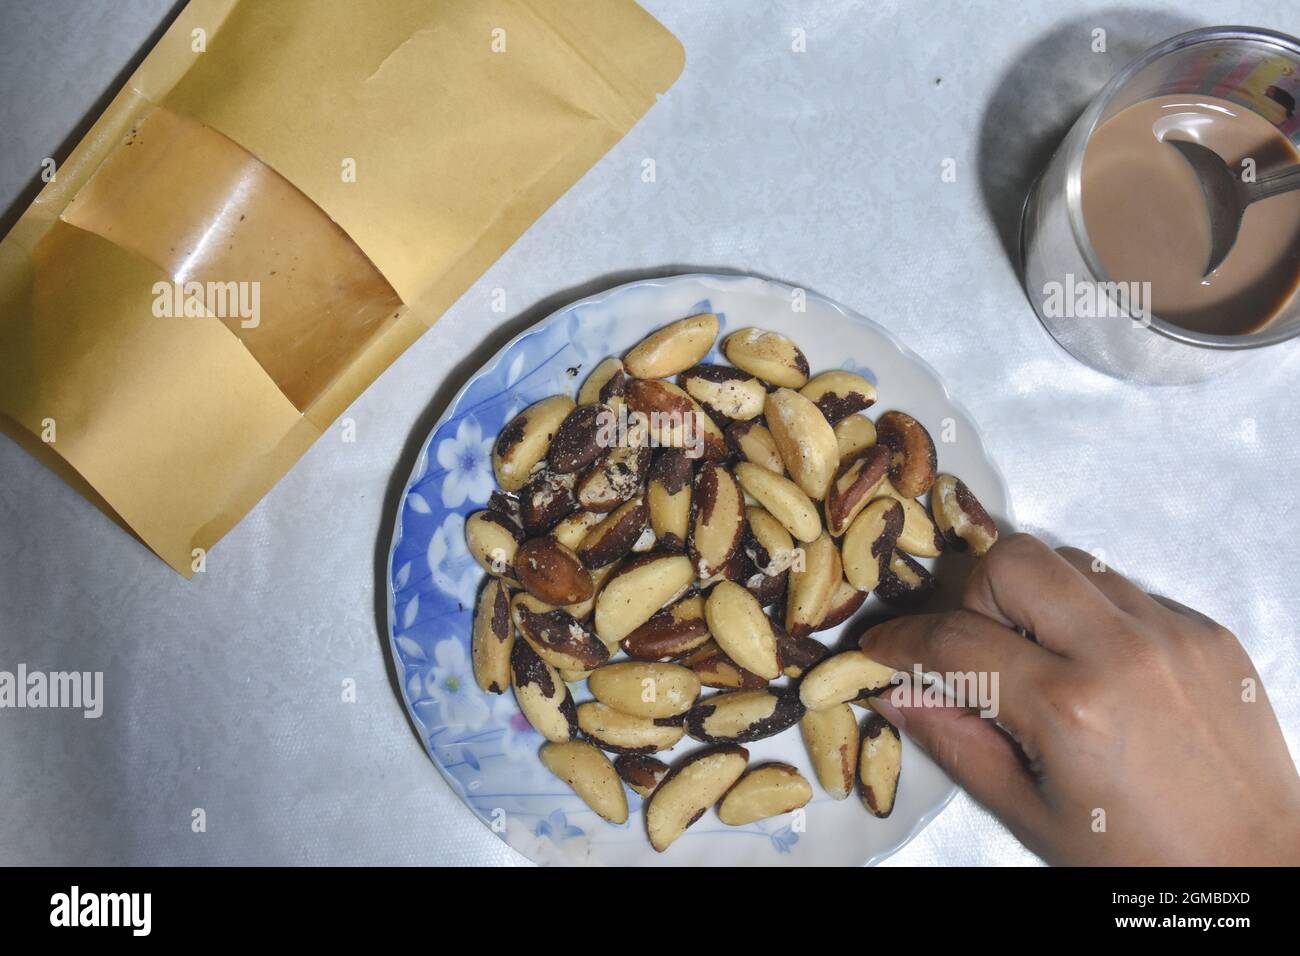 Brazil nuts top view against a table with human hand Stock Photo